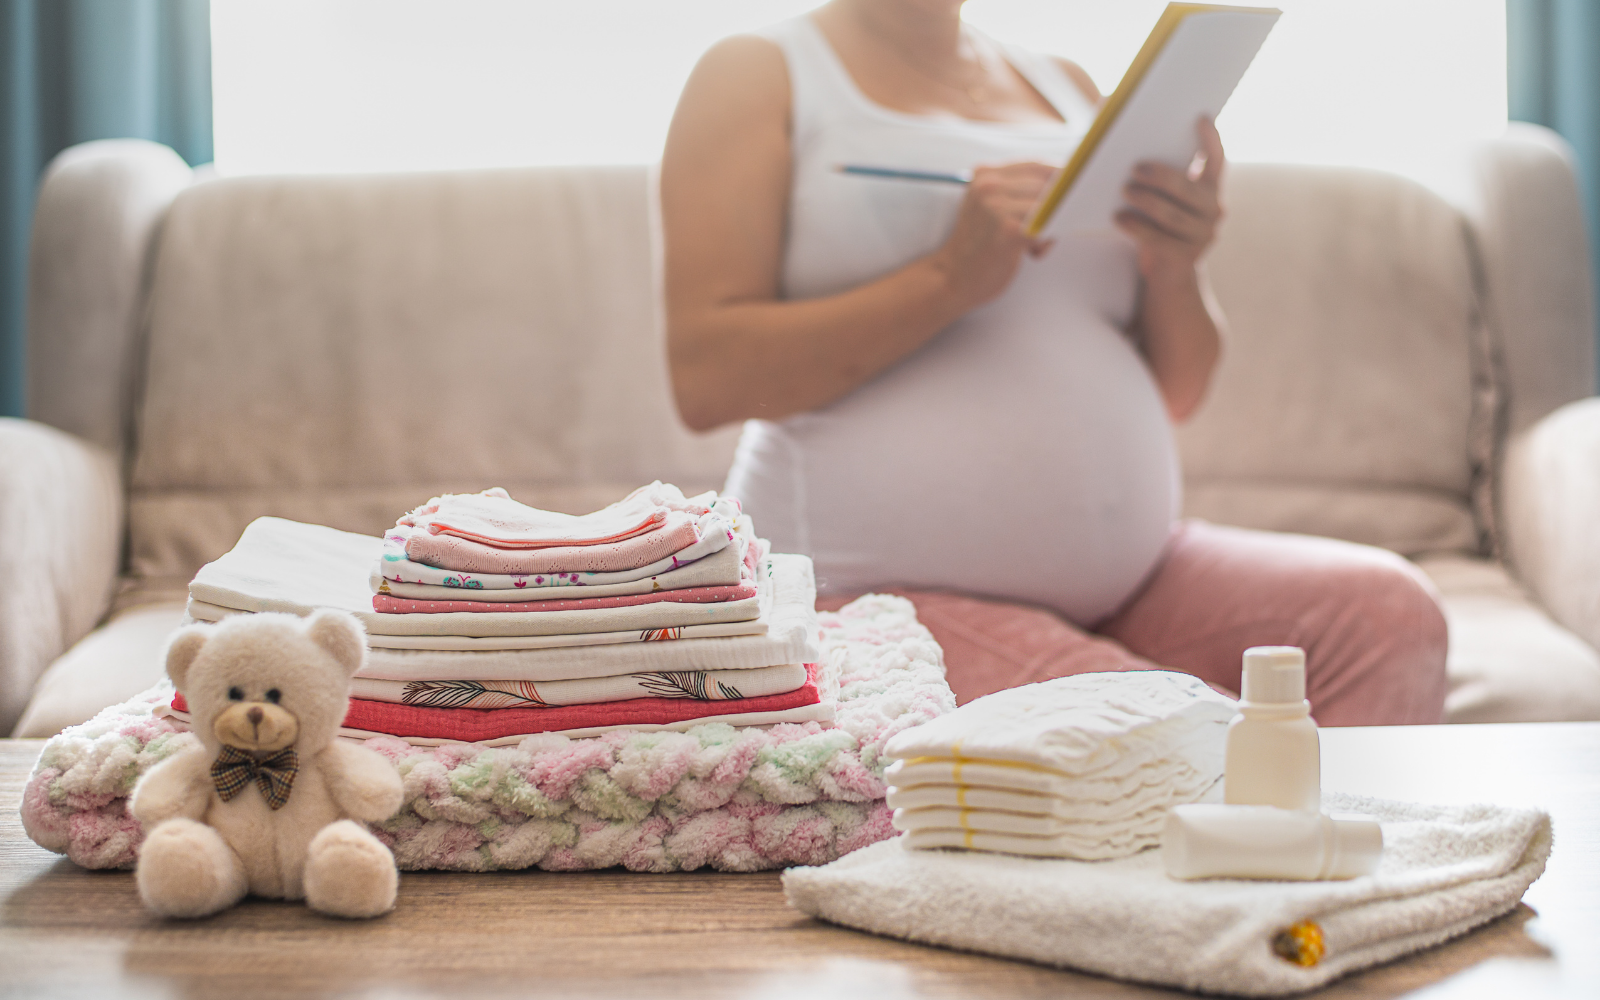 Setting up a nursery for your baby